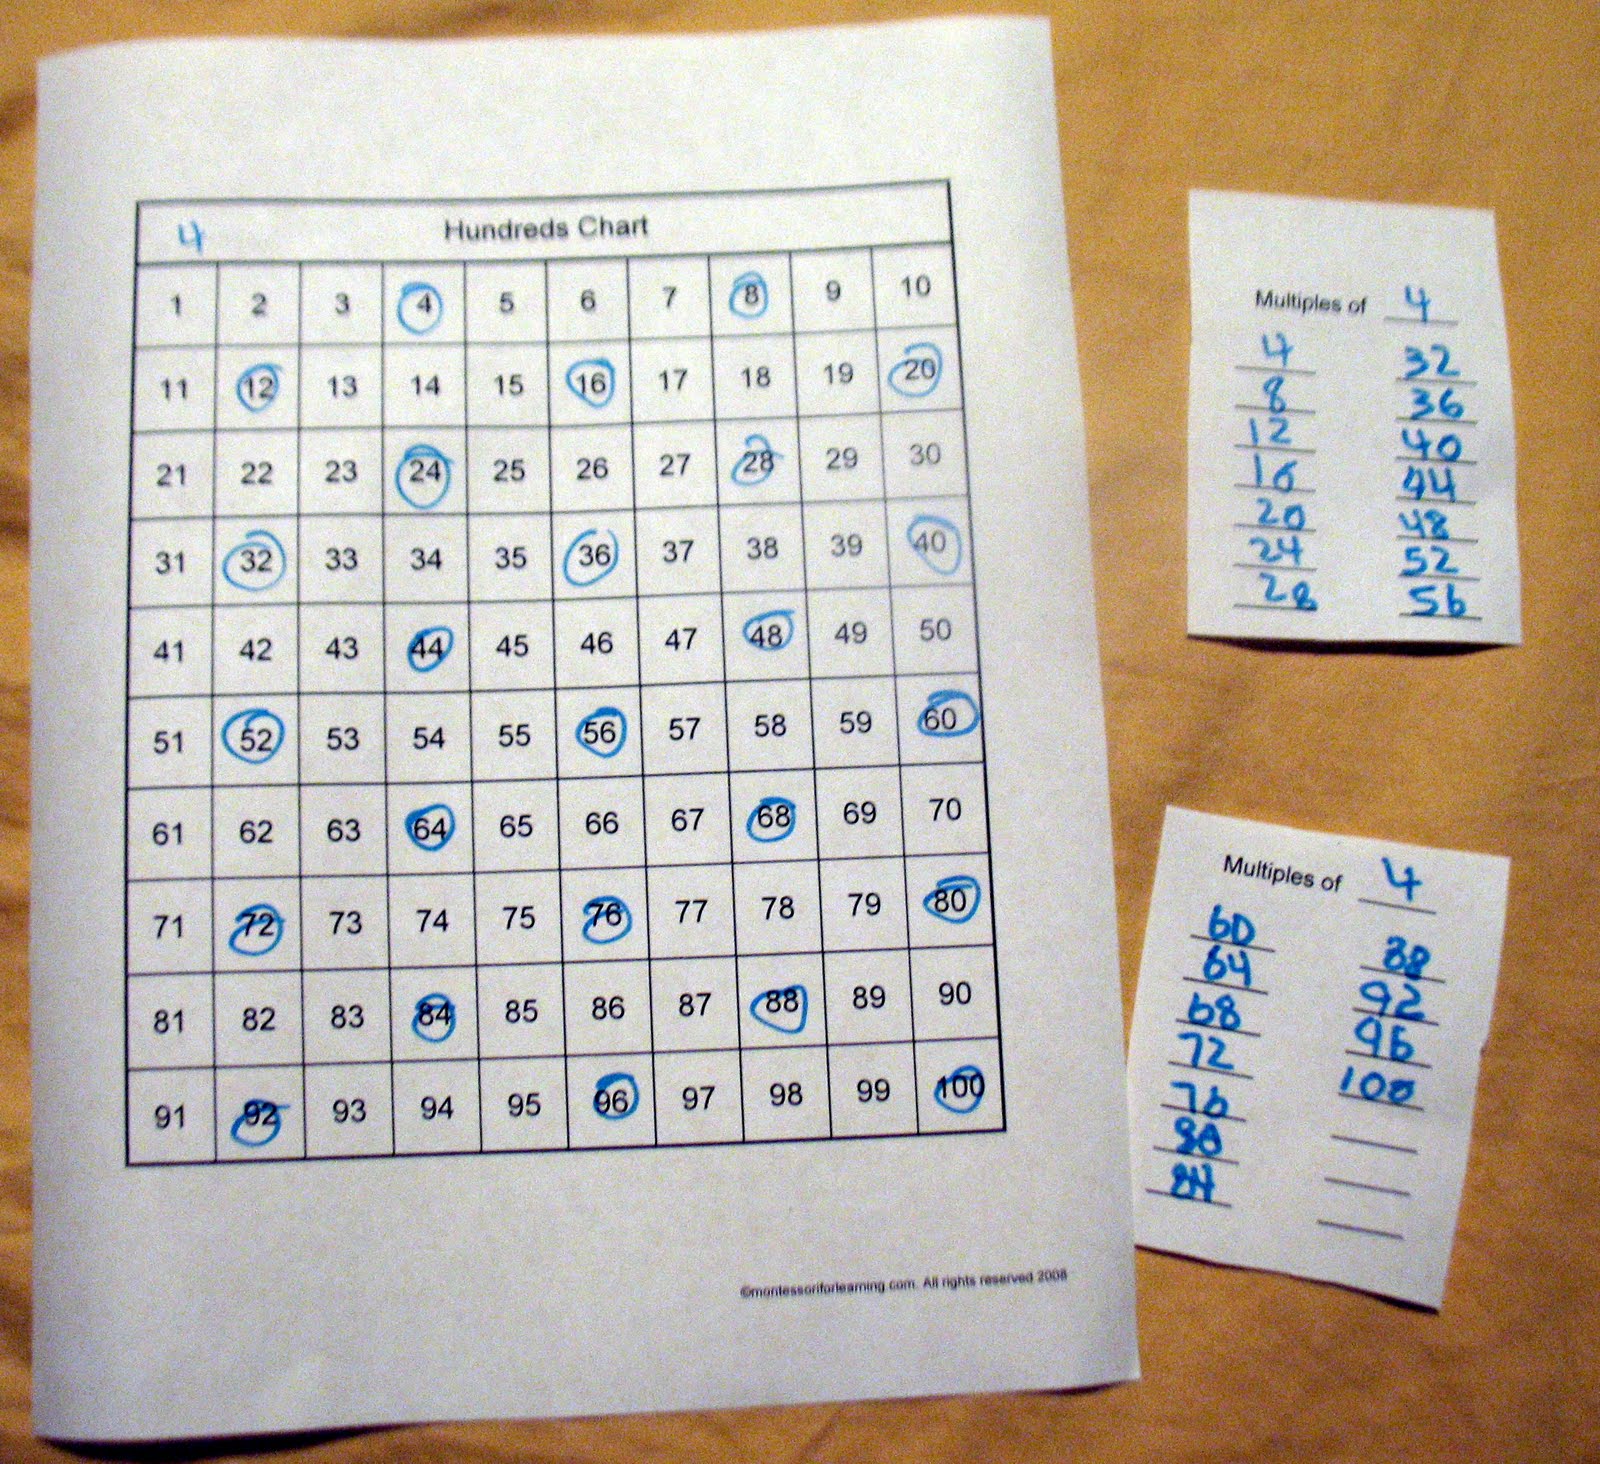 montessori-for-learning-multiples-on-number-chart